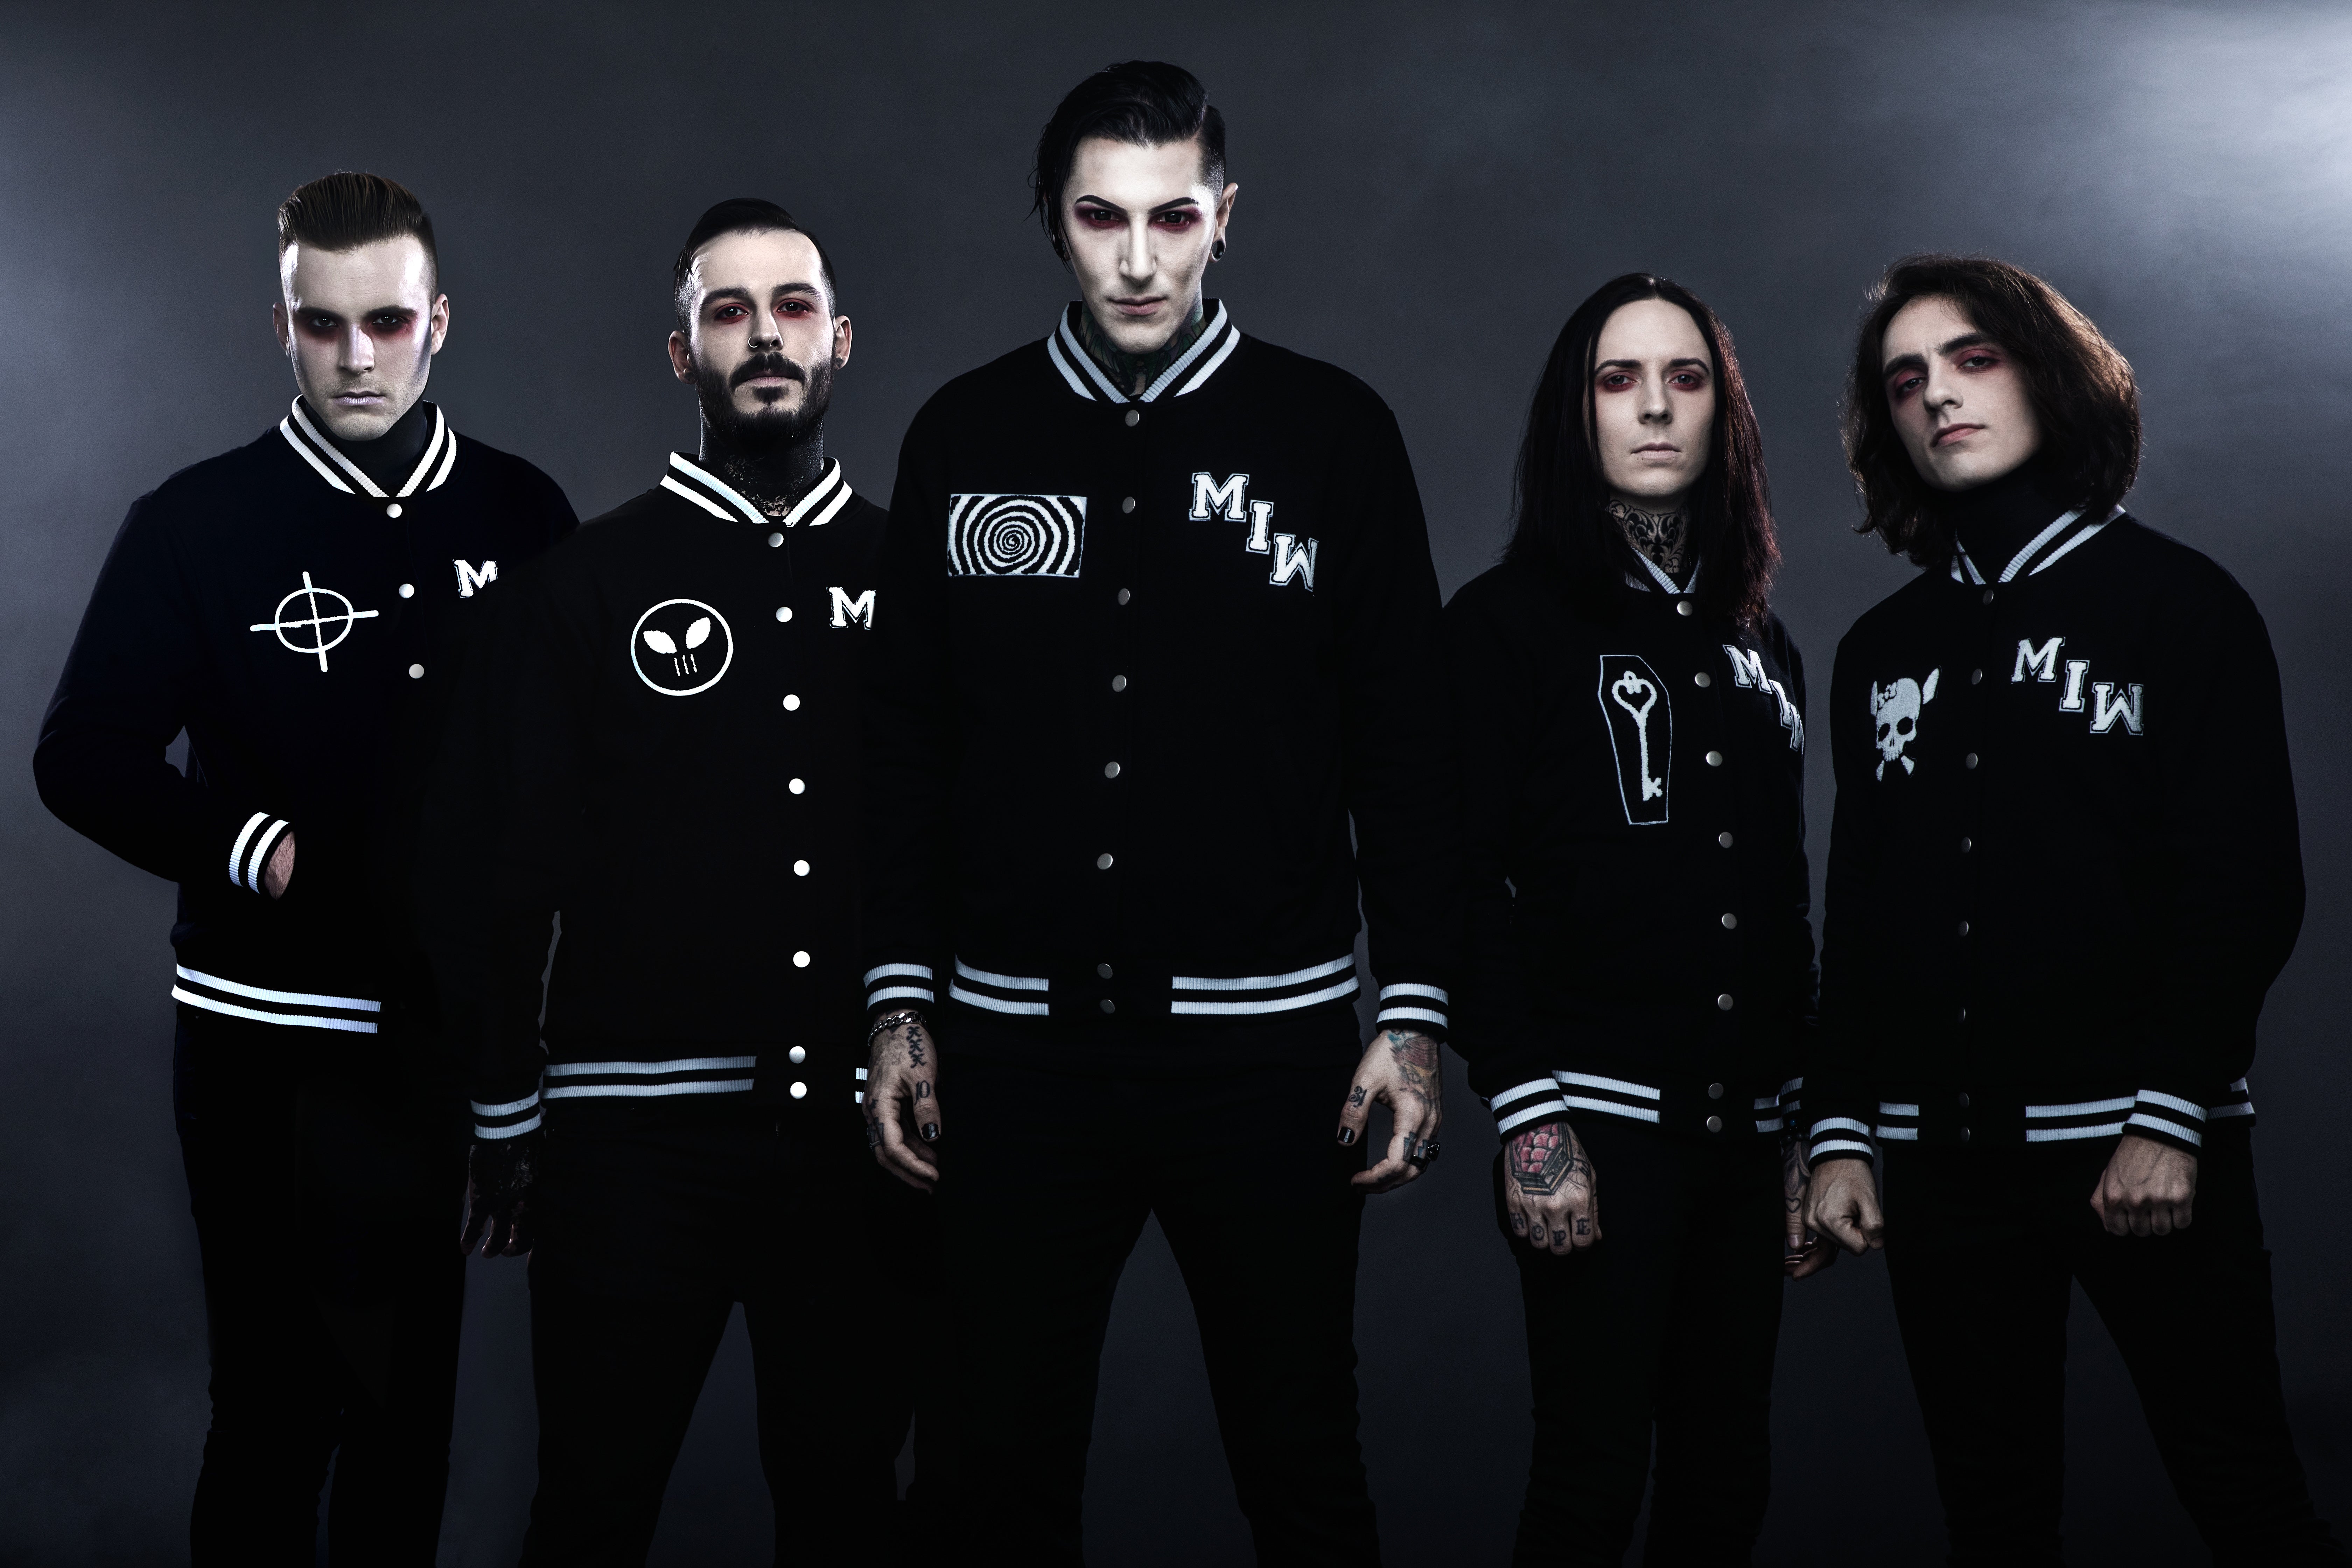 Motionless In White & In This Moment: The Dark Horizon Tour in Houston promo photo for Blabbermouth & Knotfest.com Presales presale offer code